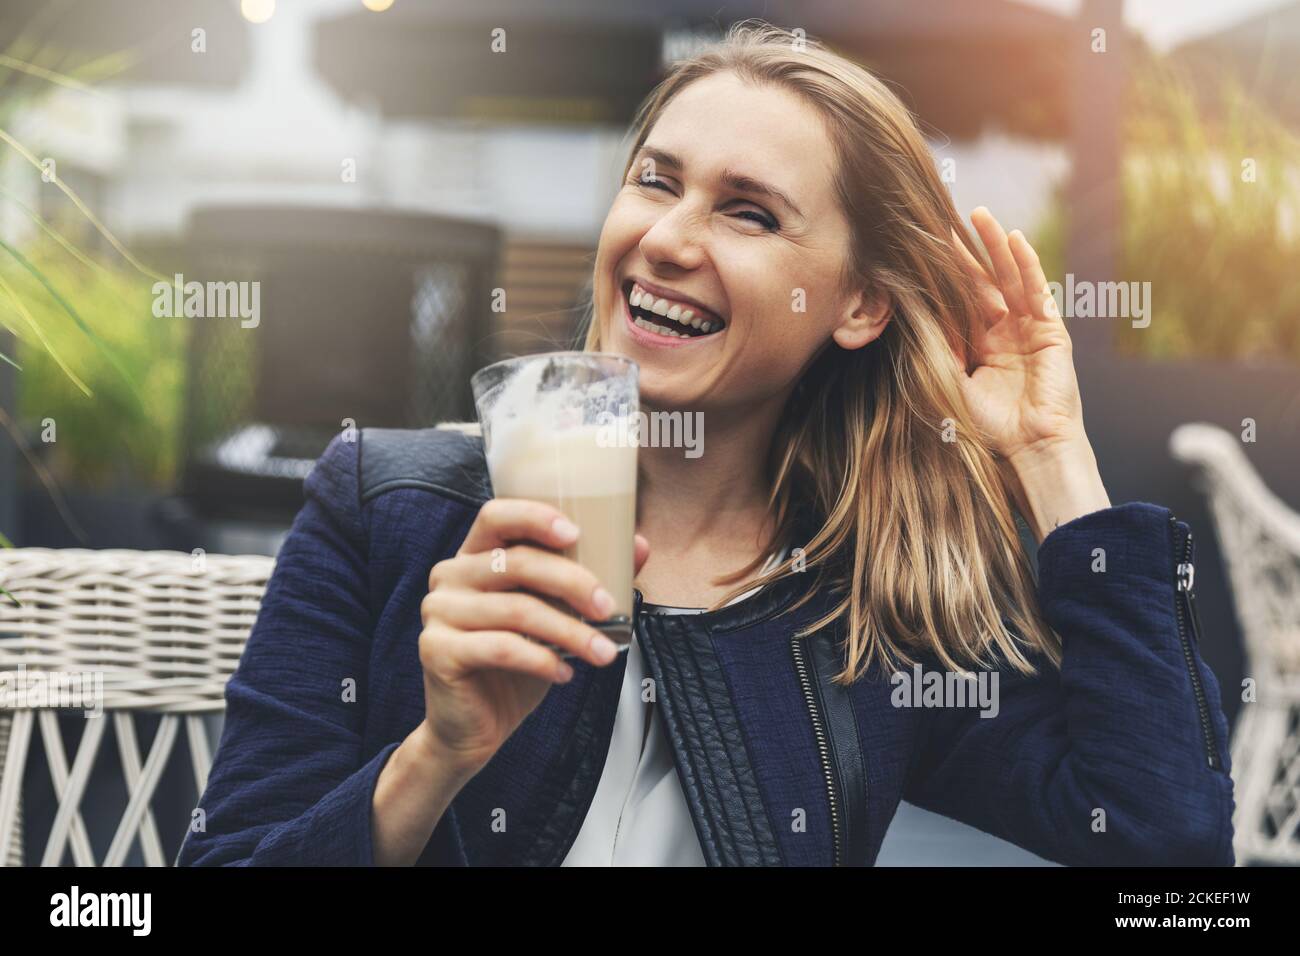 young attractive cheerful woman enjoying coffee latte at cafe outdoor terrace Stock Photo